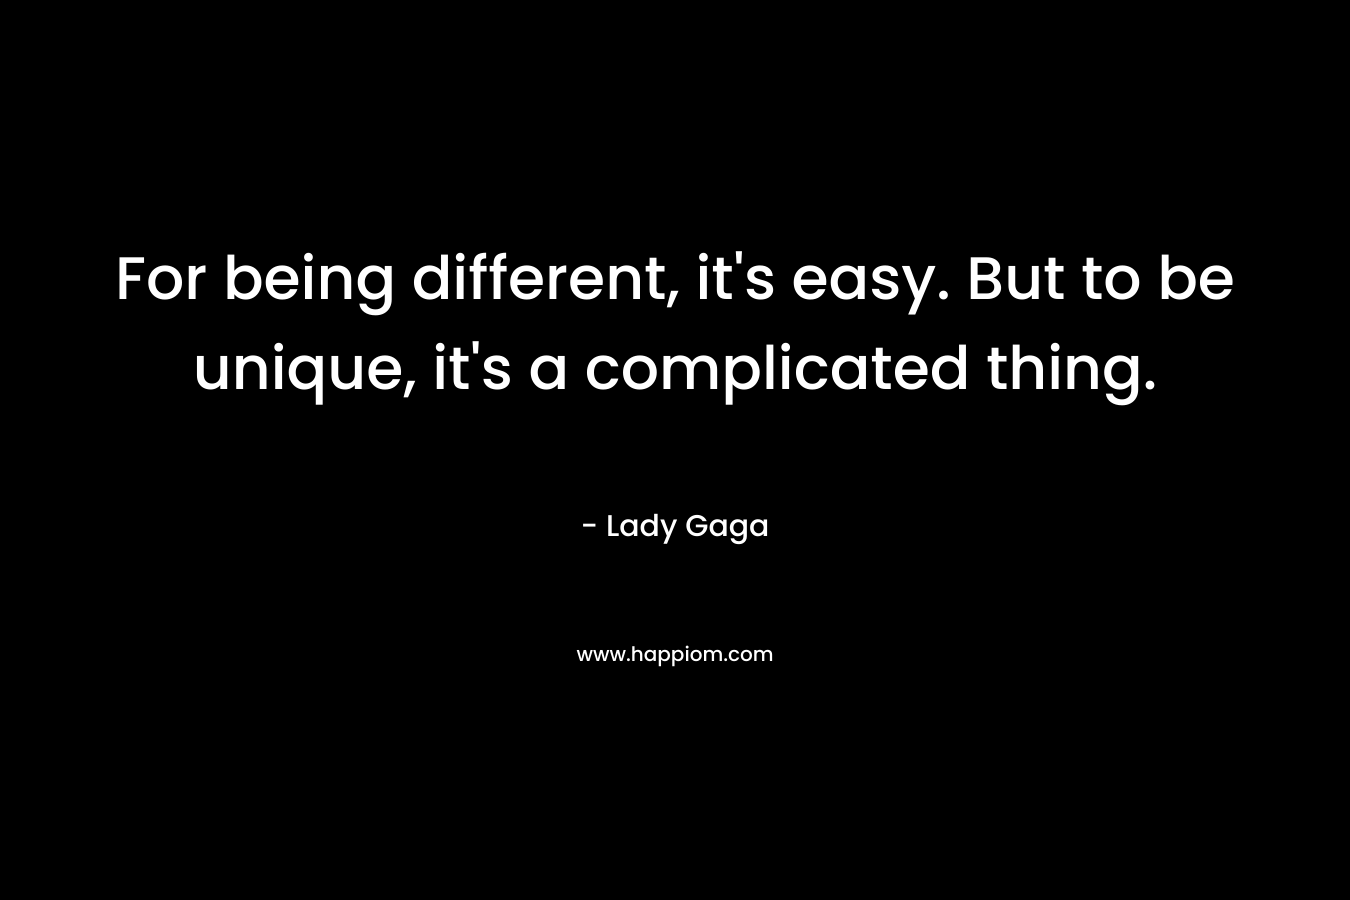 For being different, it's easy. But to be unique, it's a complicated thing.